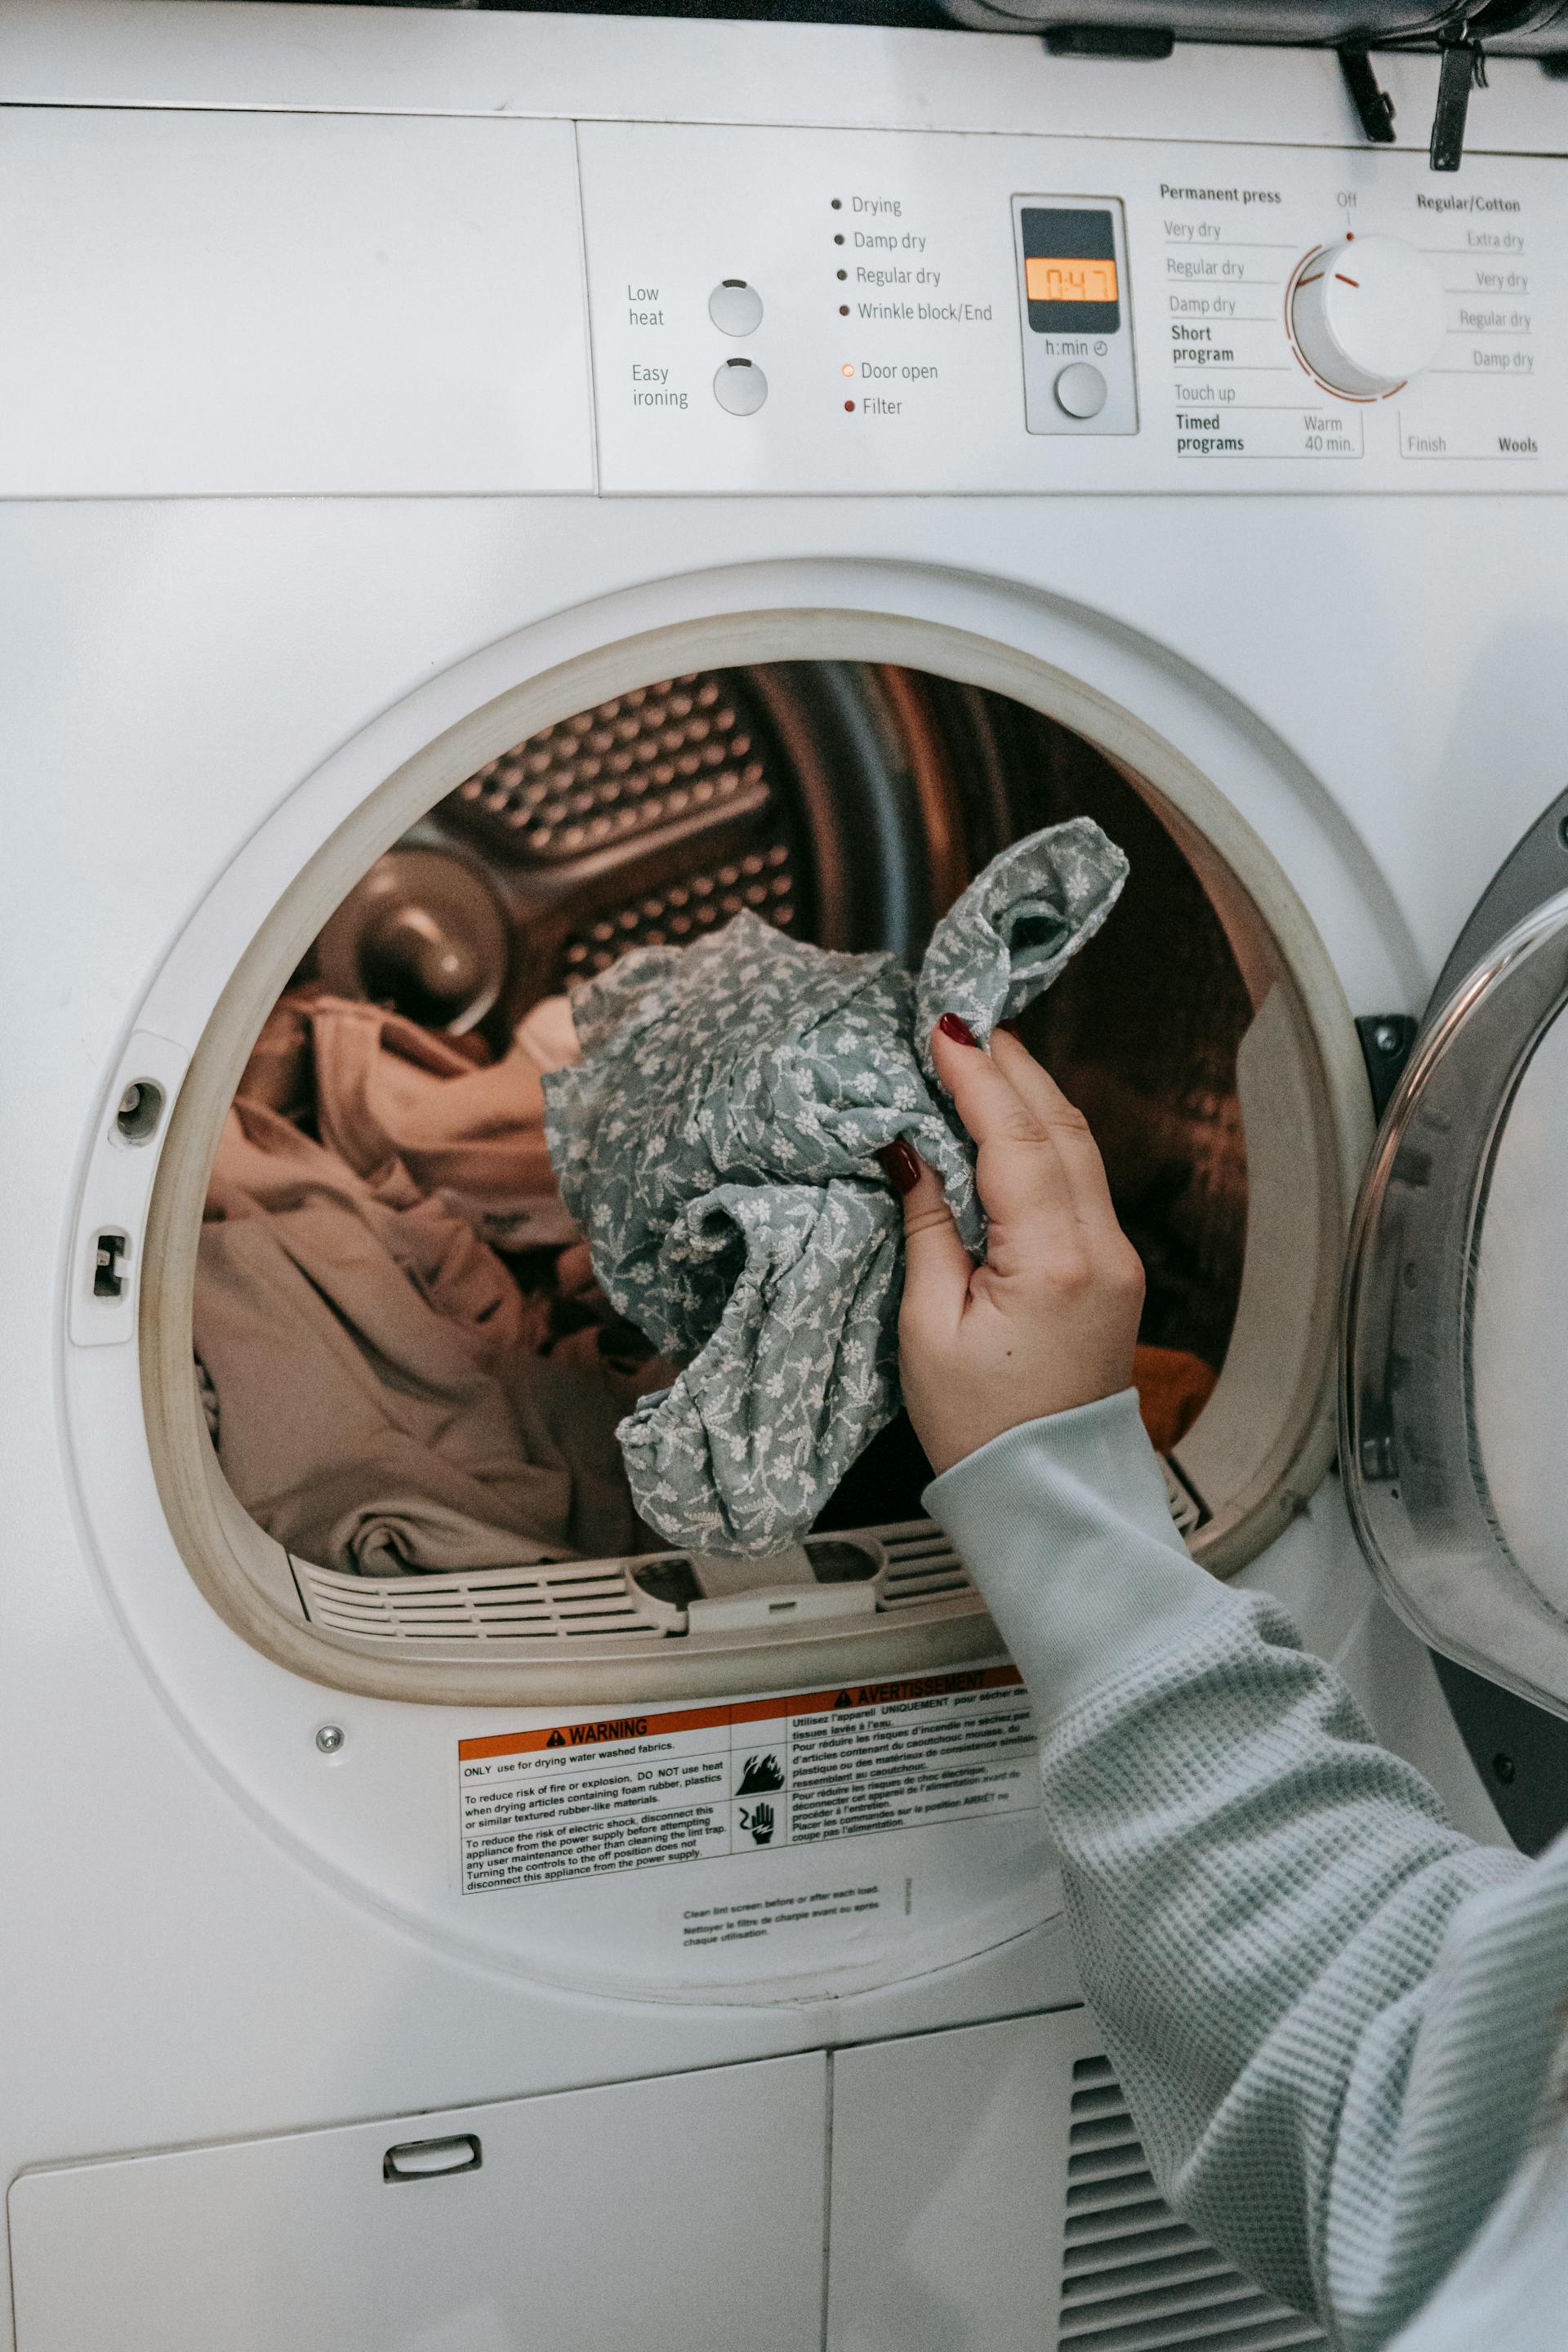 A woman doing laundry | Source: Pexels